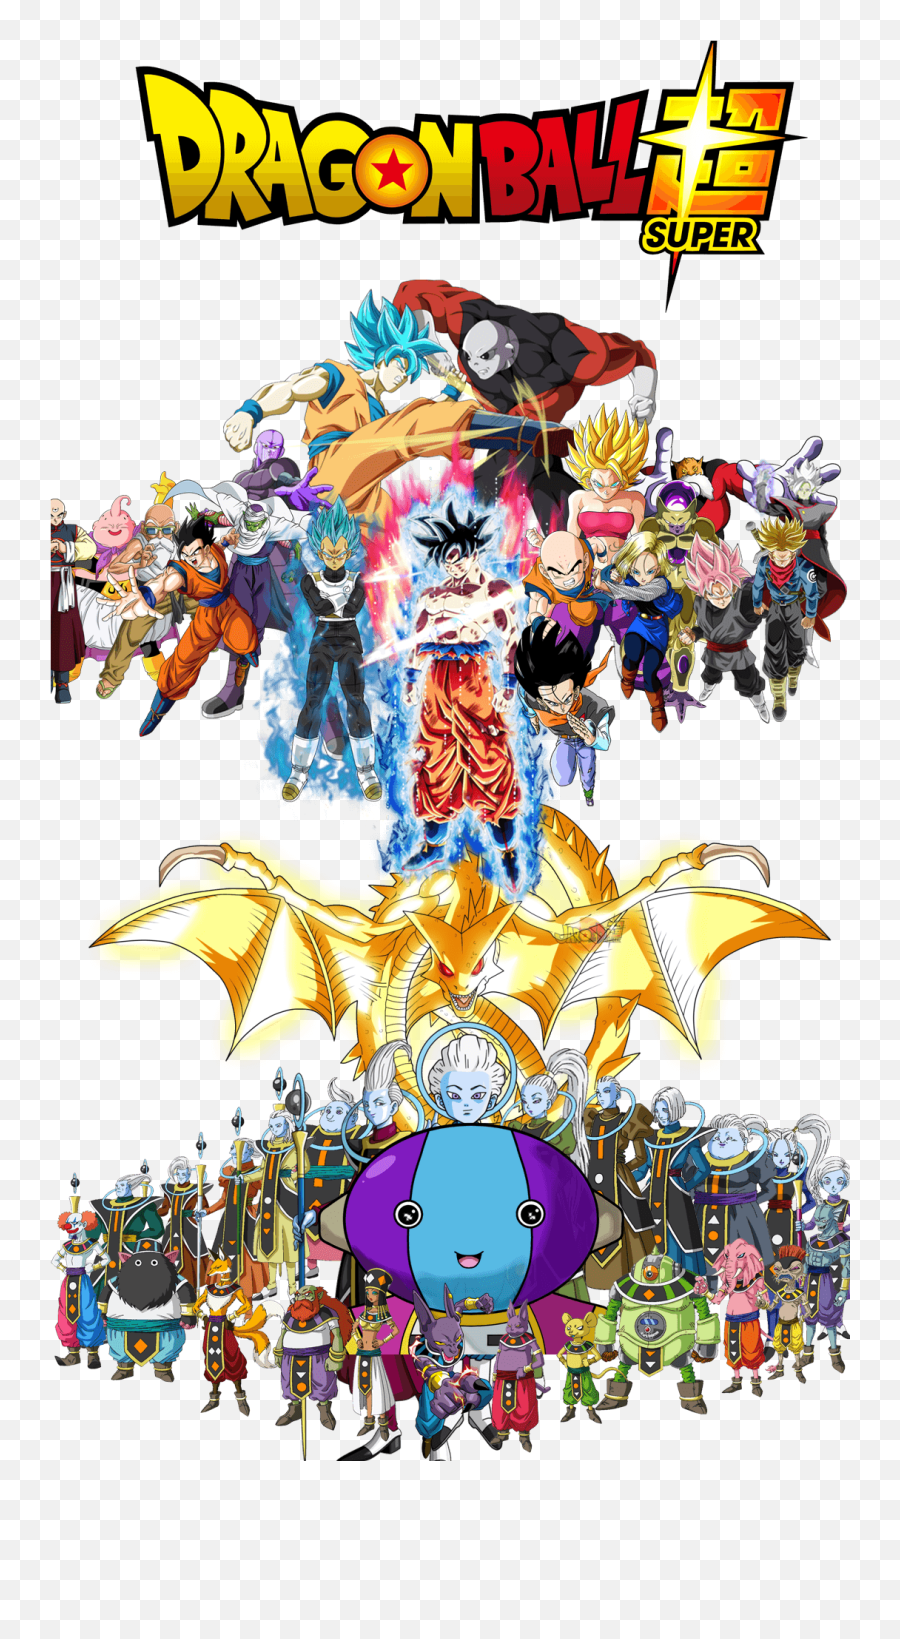 Download Free Png Dragon Ball Z Iphone Wallpapers - Top Free Dragon Ball Wallpaper Iphone 6,Dragon Ball Super Broly Png